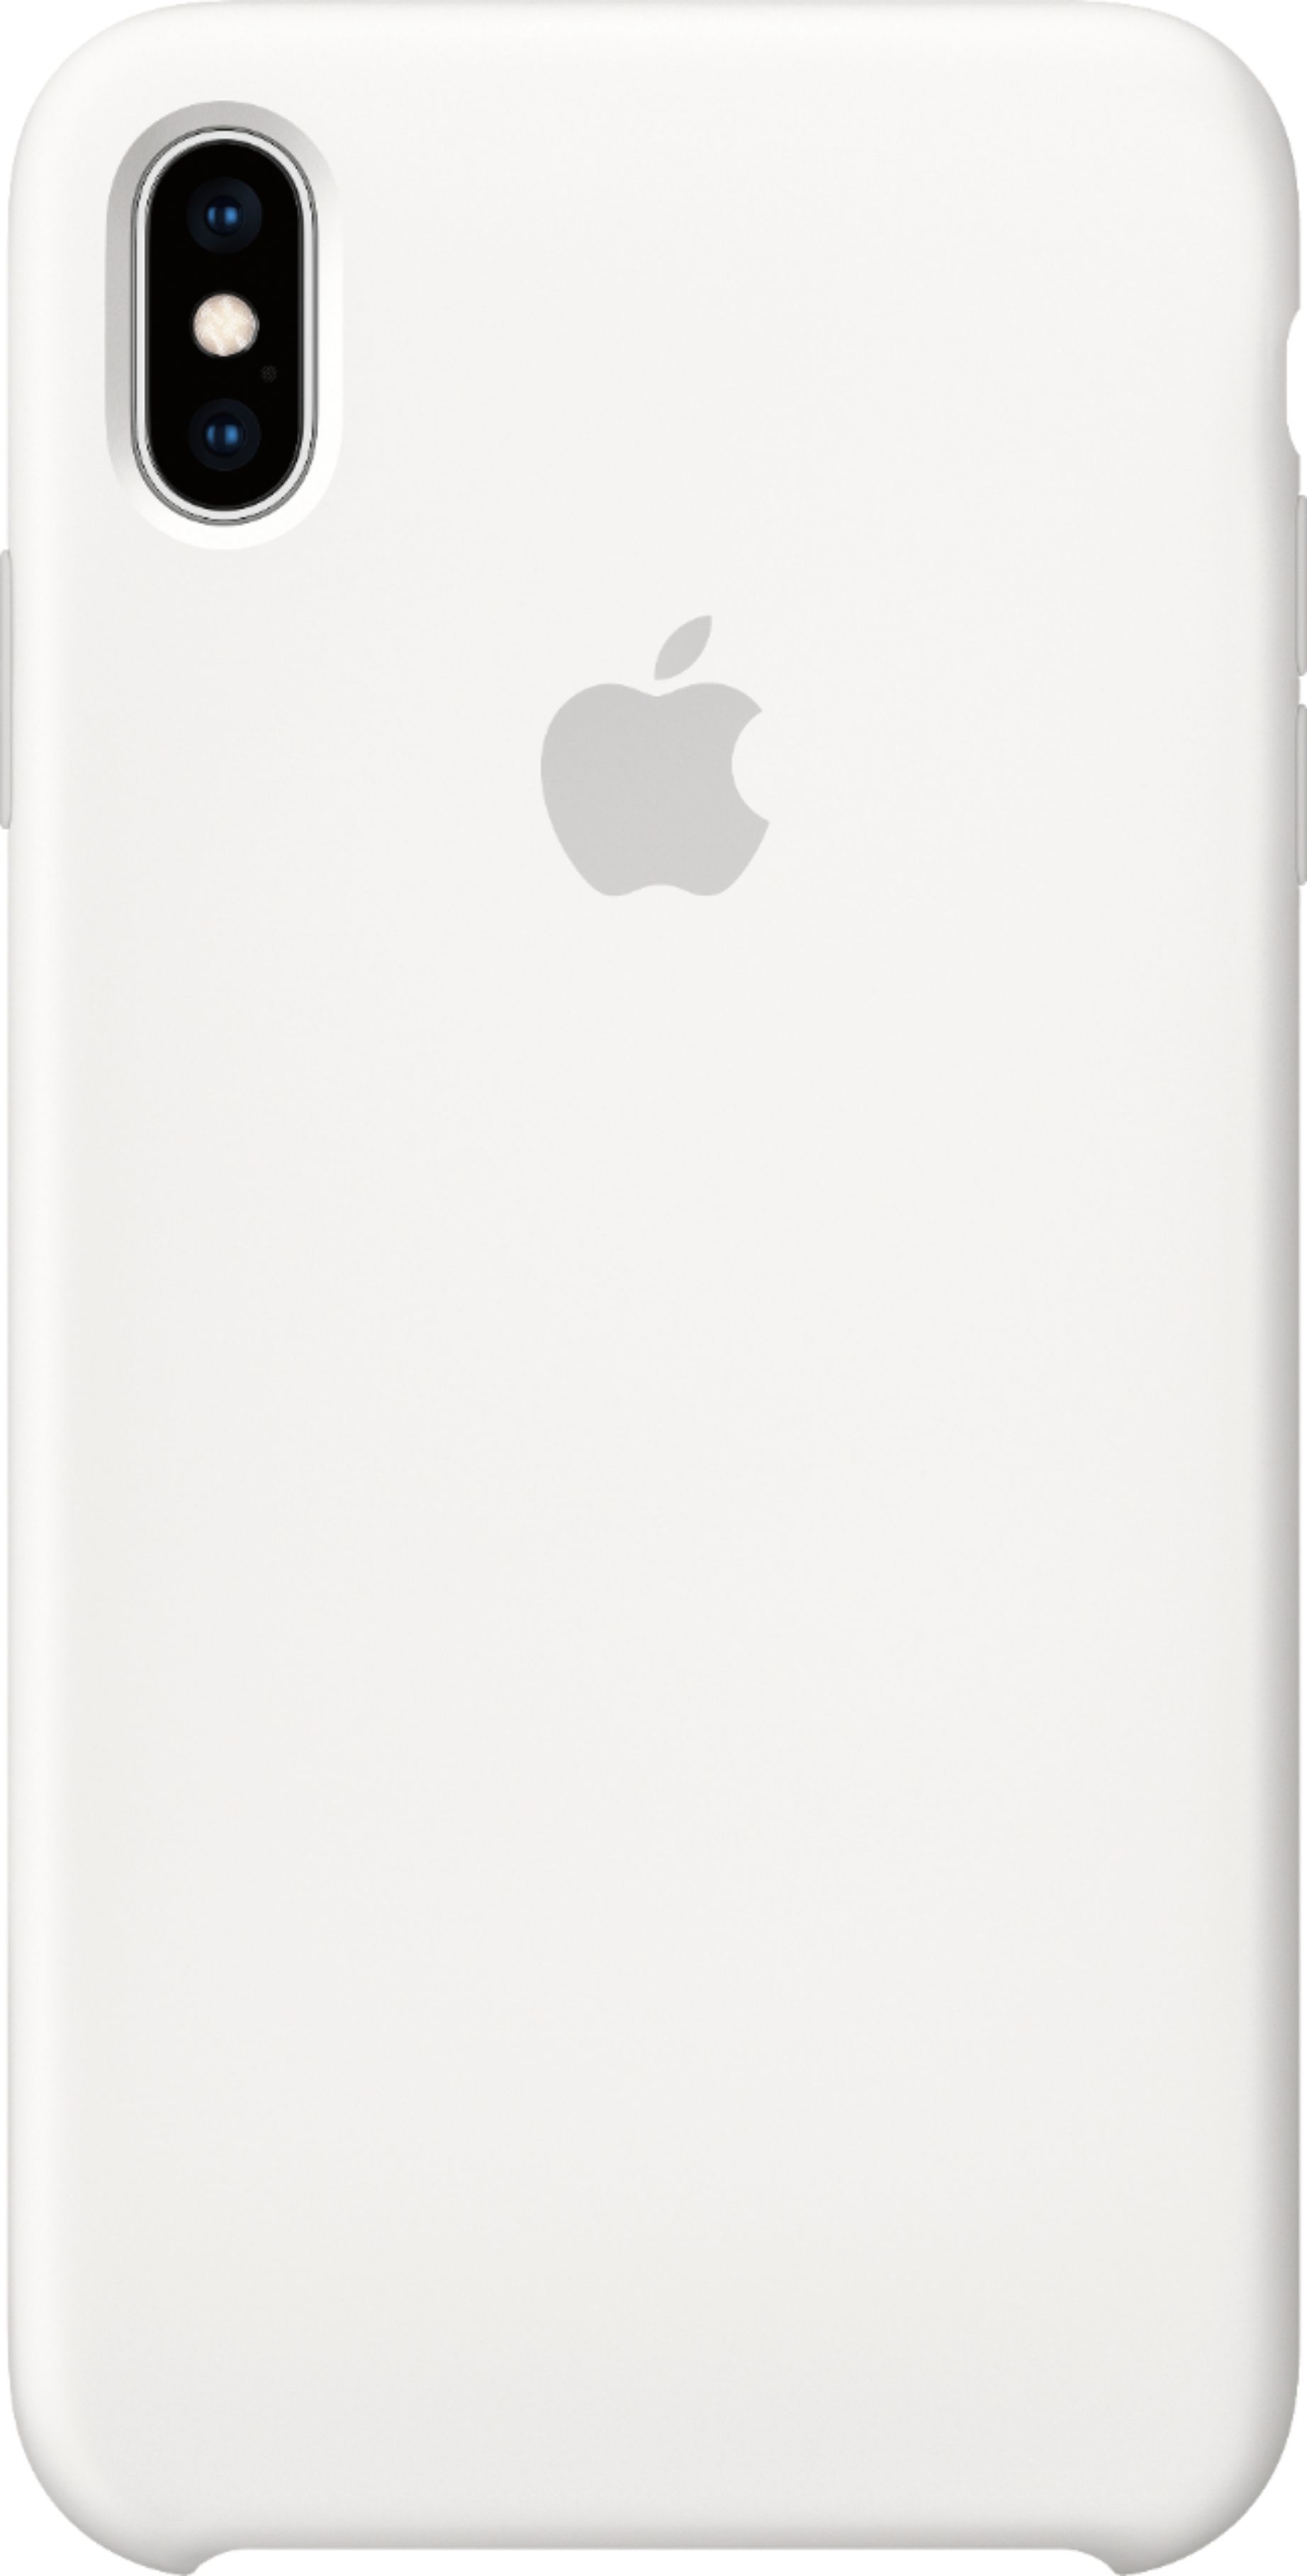 Best Buy Apple Iphone Xs Max Silicone Case White Mrwf2zm A